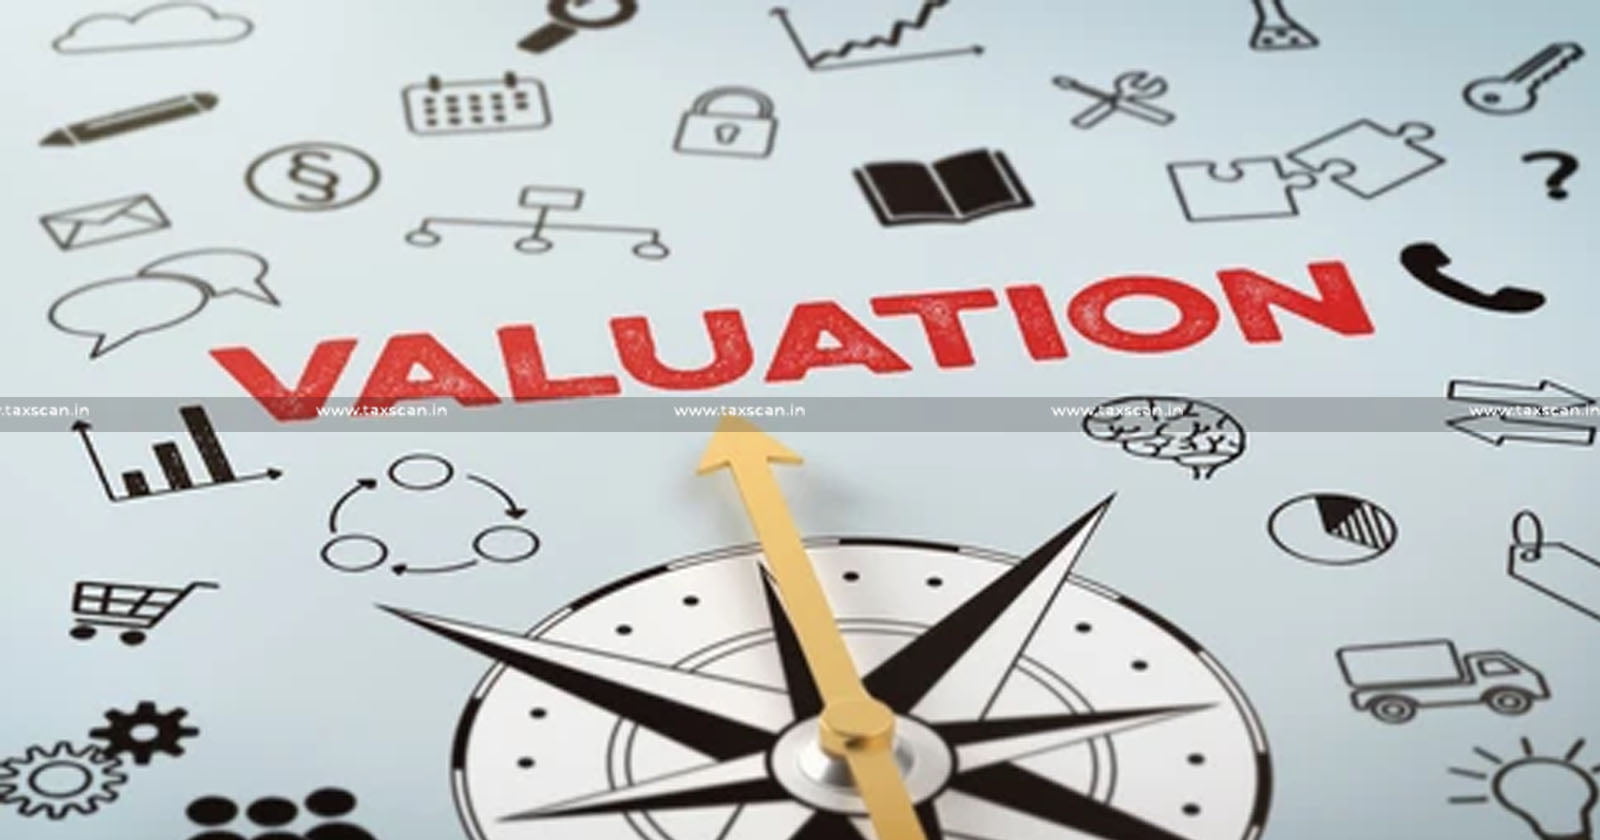 RV - Valuation - Valuation Report - IBBI - Valuer - important indices in preparation of valuation report - preparation of valuation report - RV Misconduct - Misconduct - taxscan